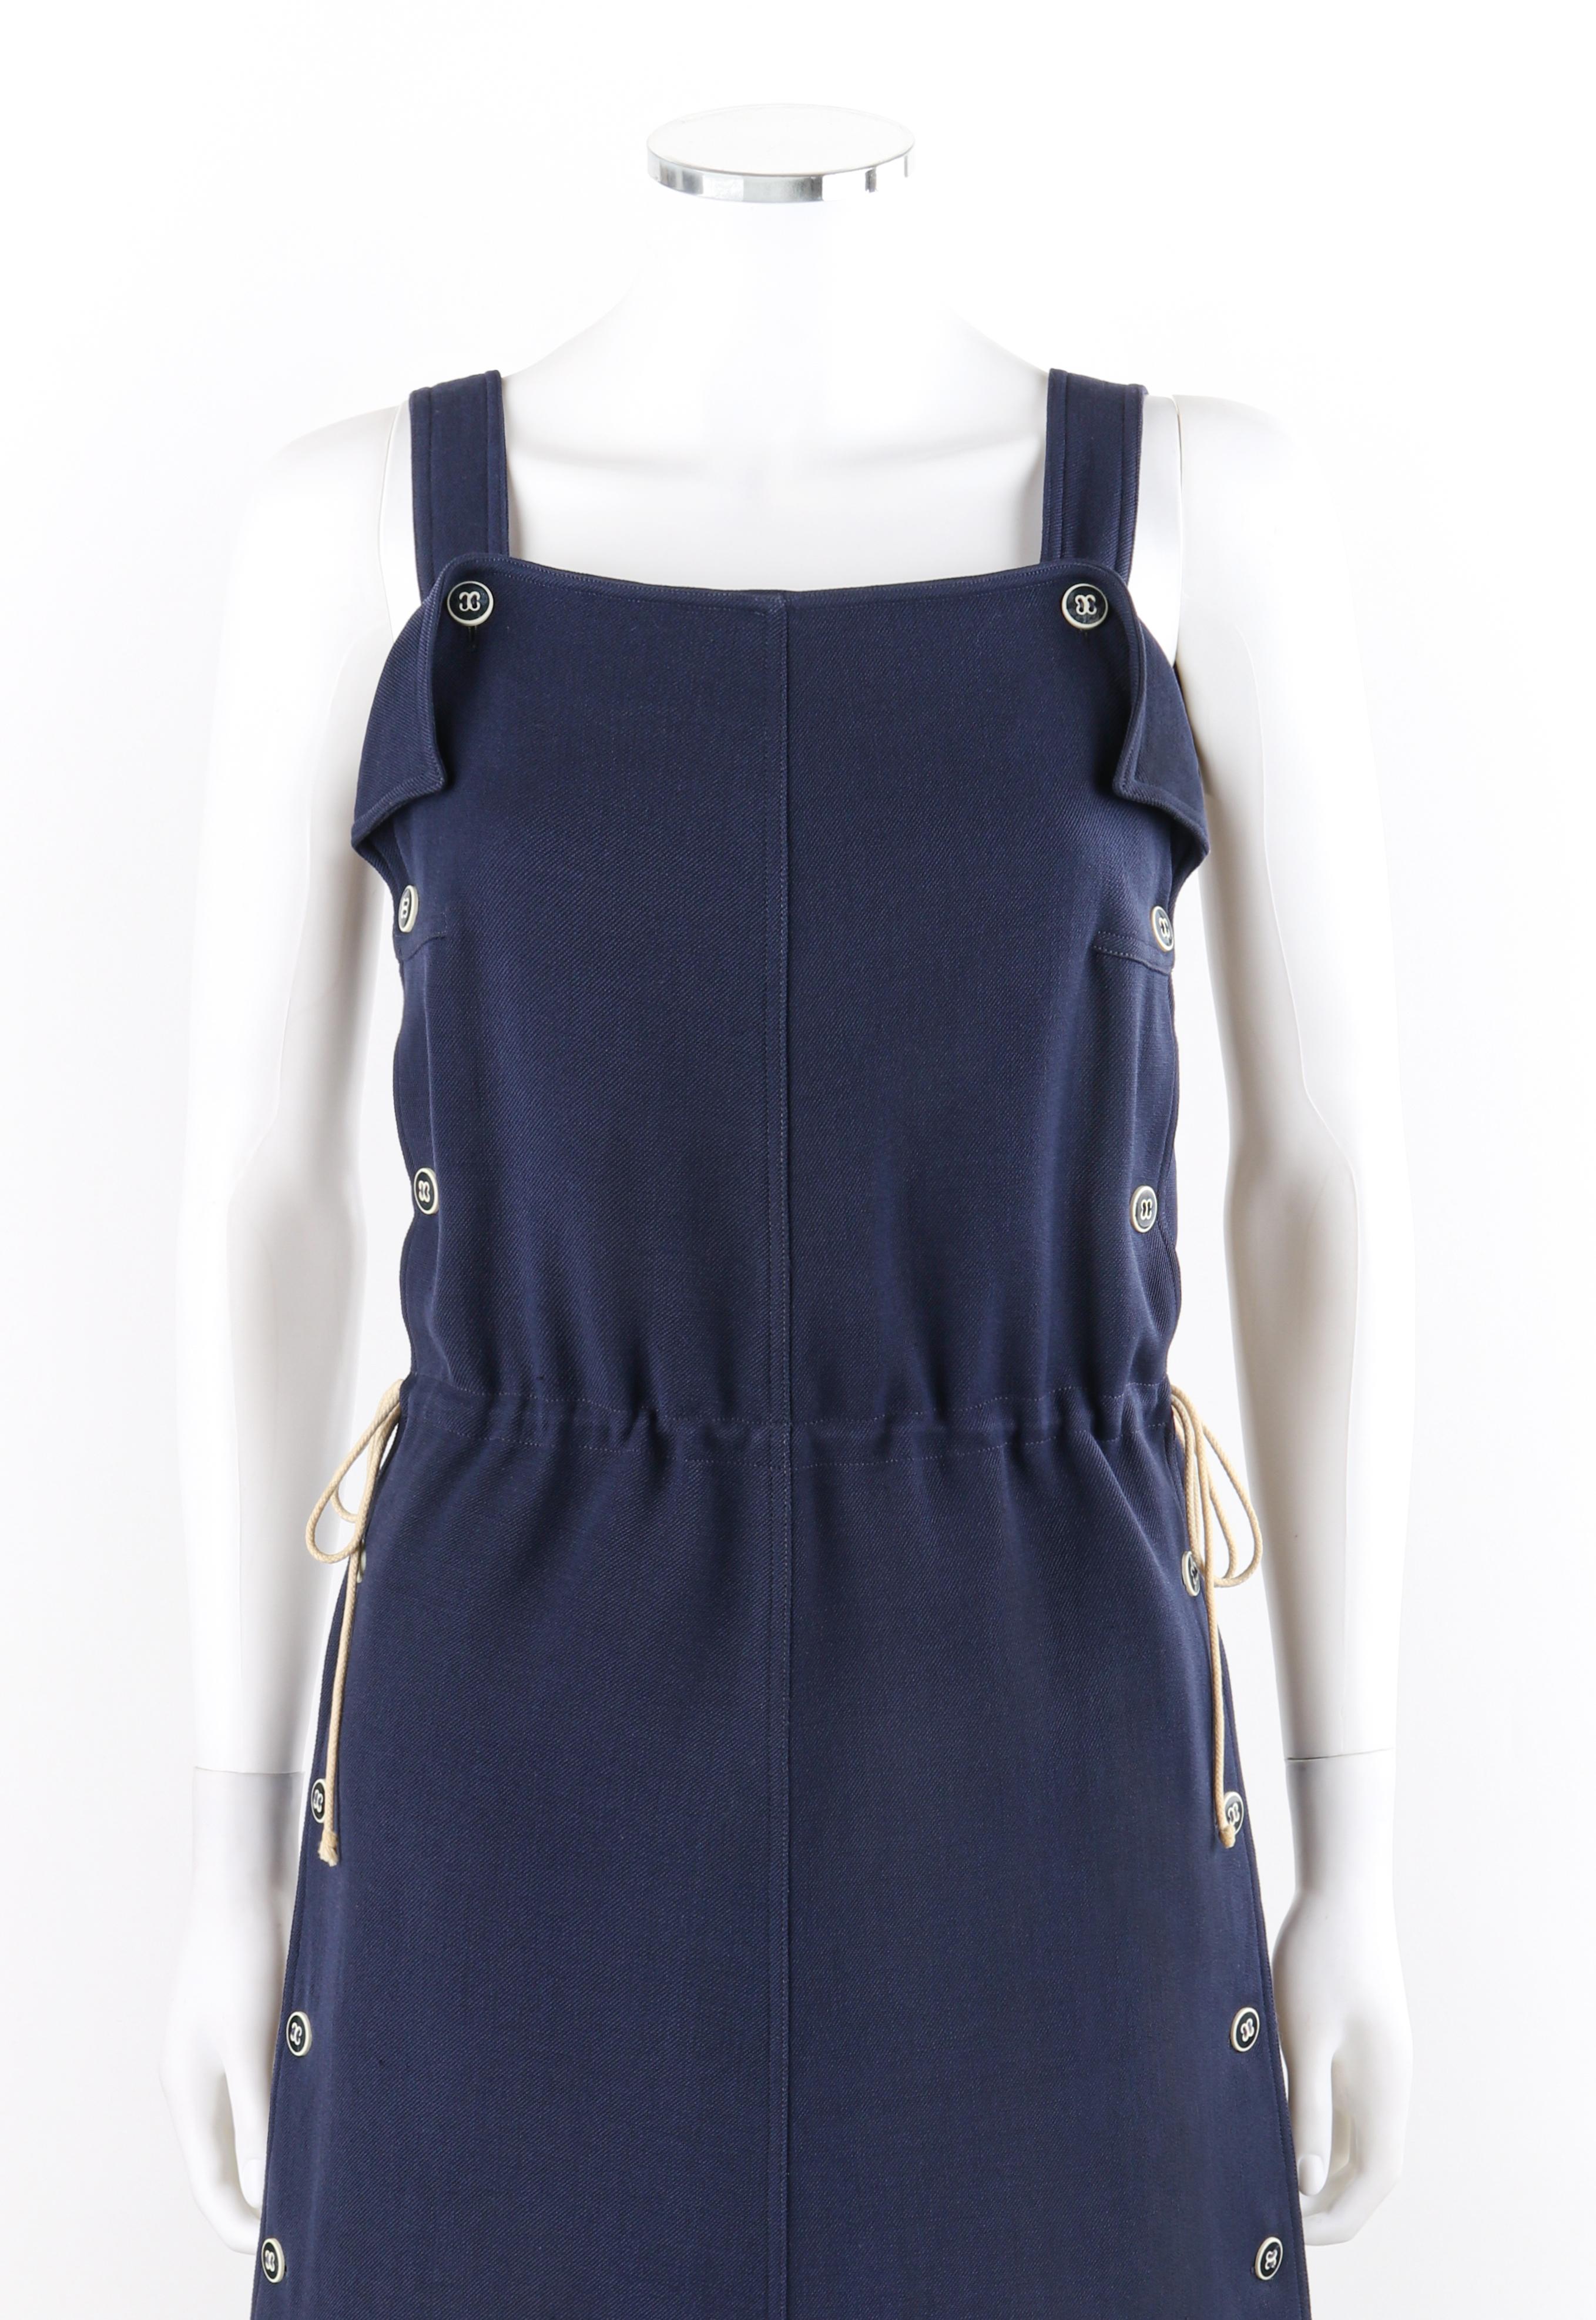 COURREGES c.1970’s Navy Blue Button Up Tie Cinch Waist Sleeveless Jumper Dress
 
Circa: 1970’s
Label(s): Courreges Paris
Designer: Andre Courreges
Style: A-line jumper dress
Color(s): Dark blue and white
Lined: Yes
Marked Fabric Content: “95% Wool,